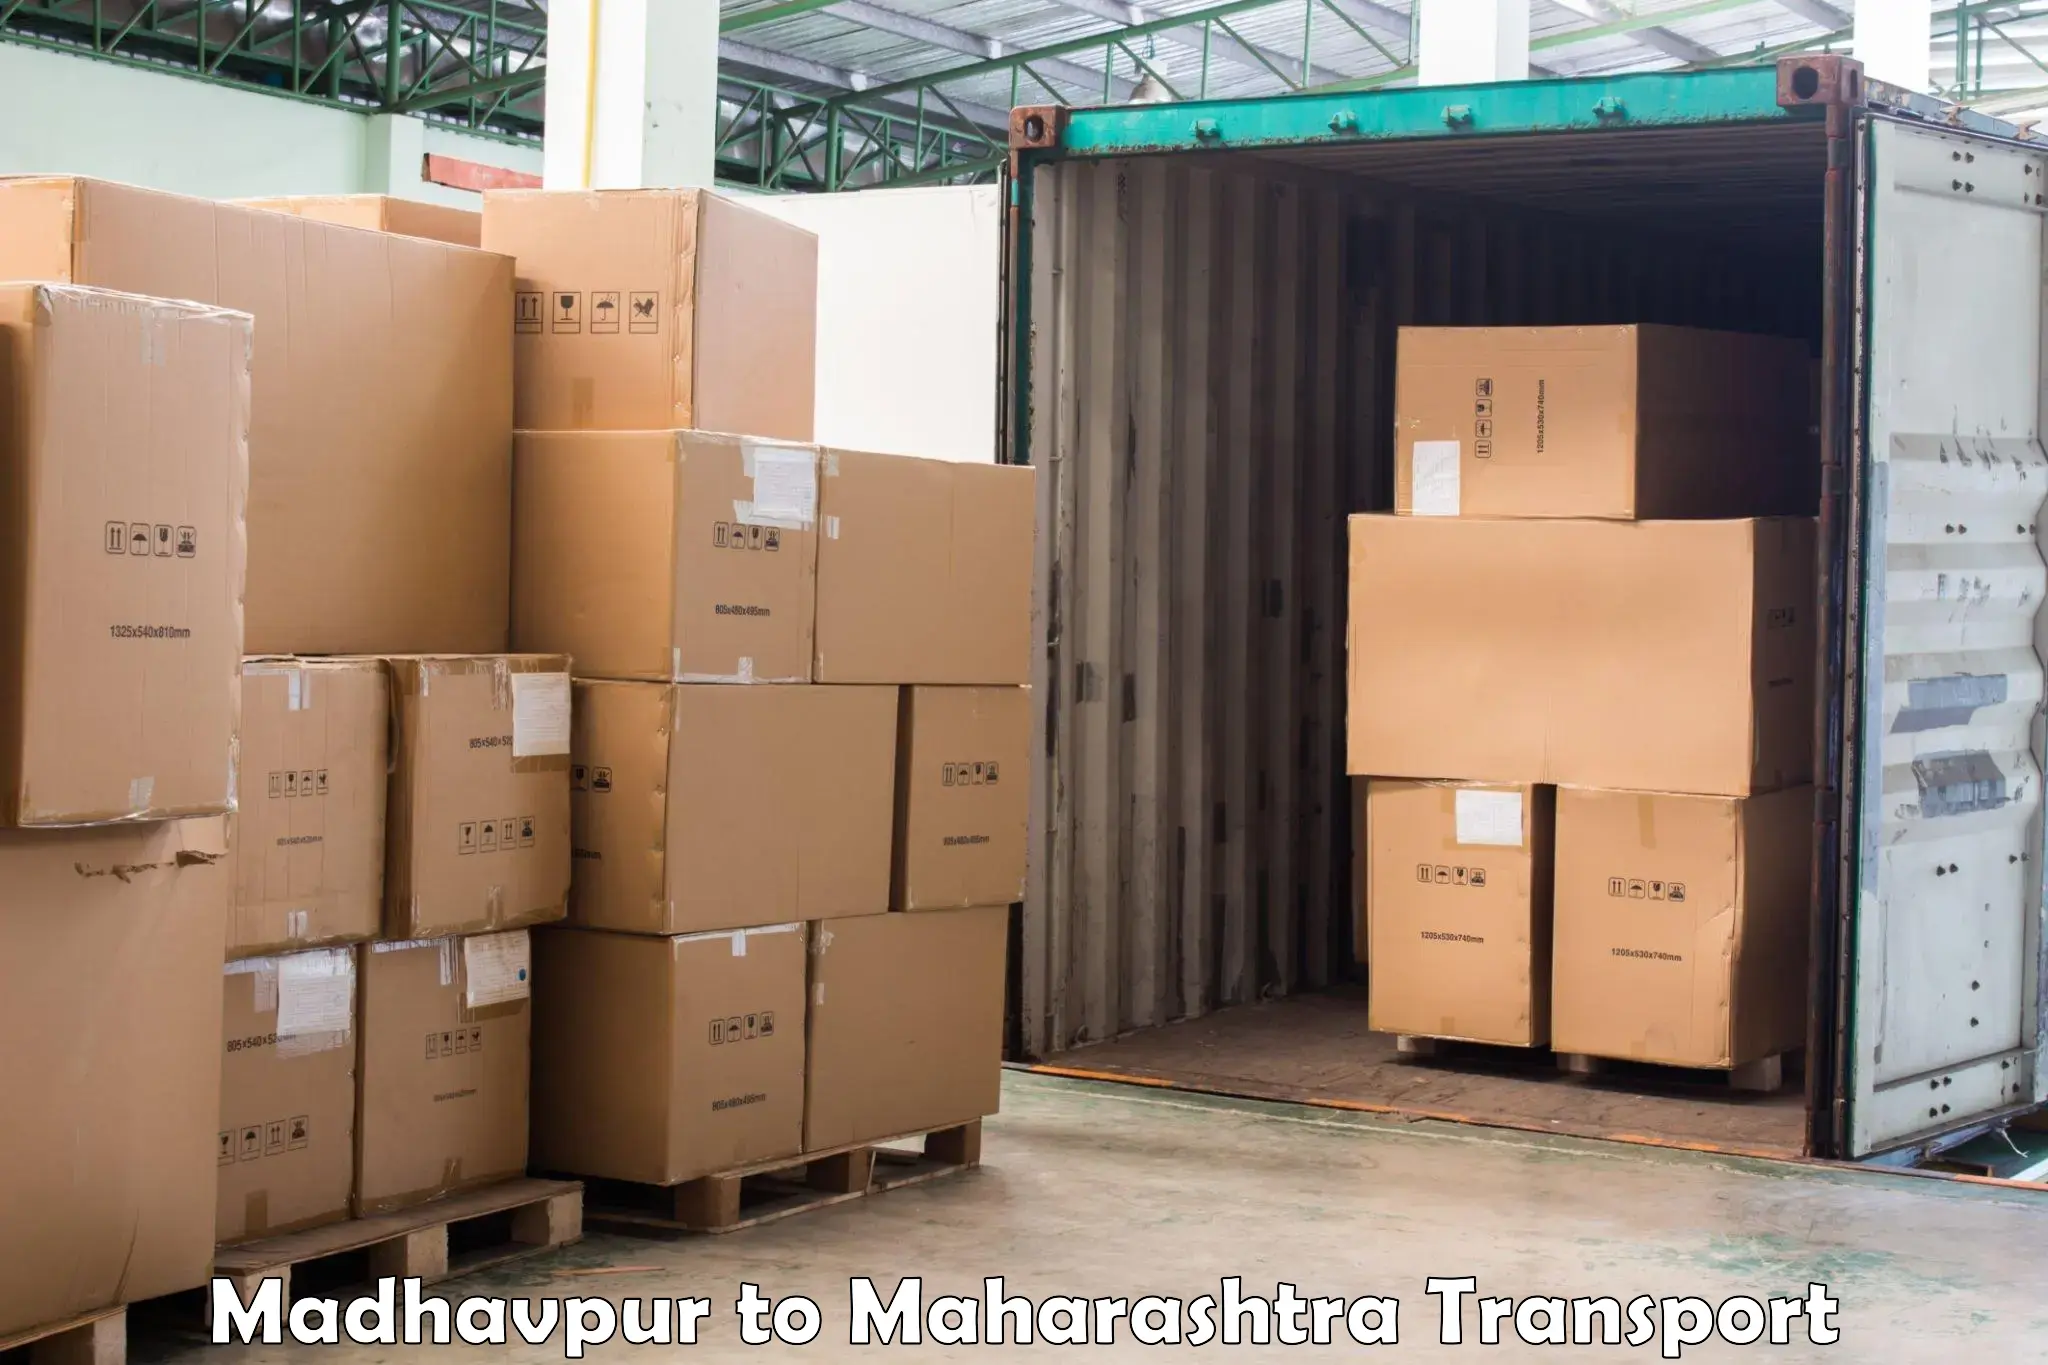 Cycle transportation service in Madhavpur to Pandharpur